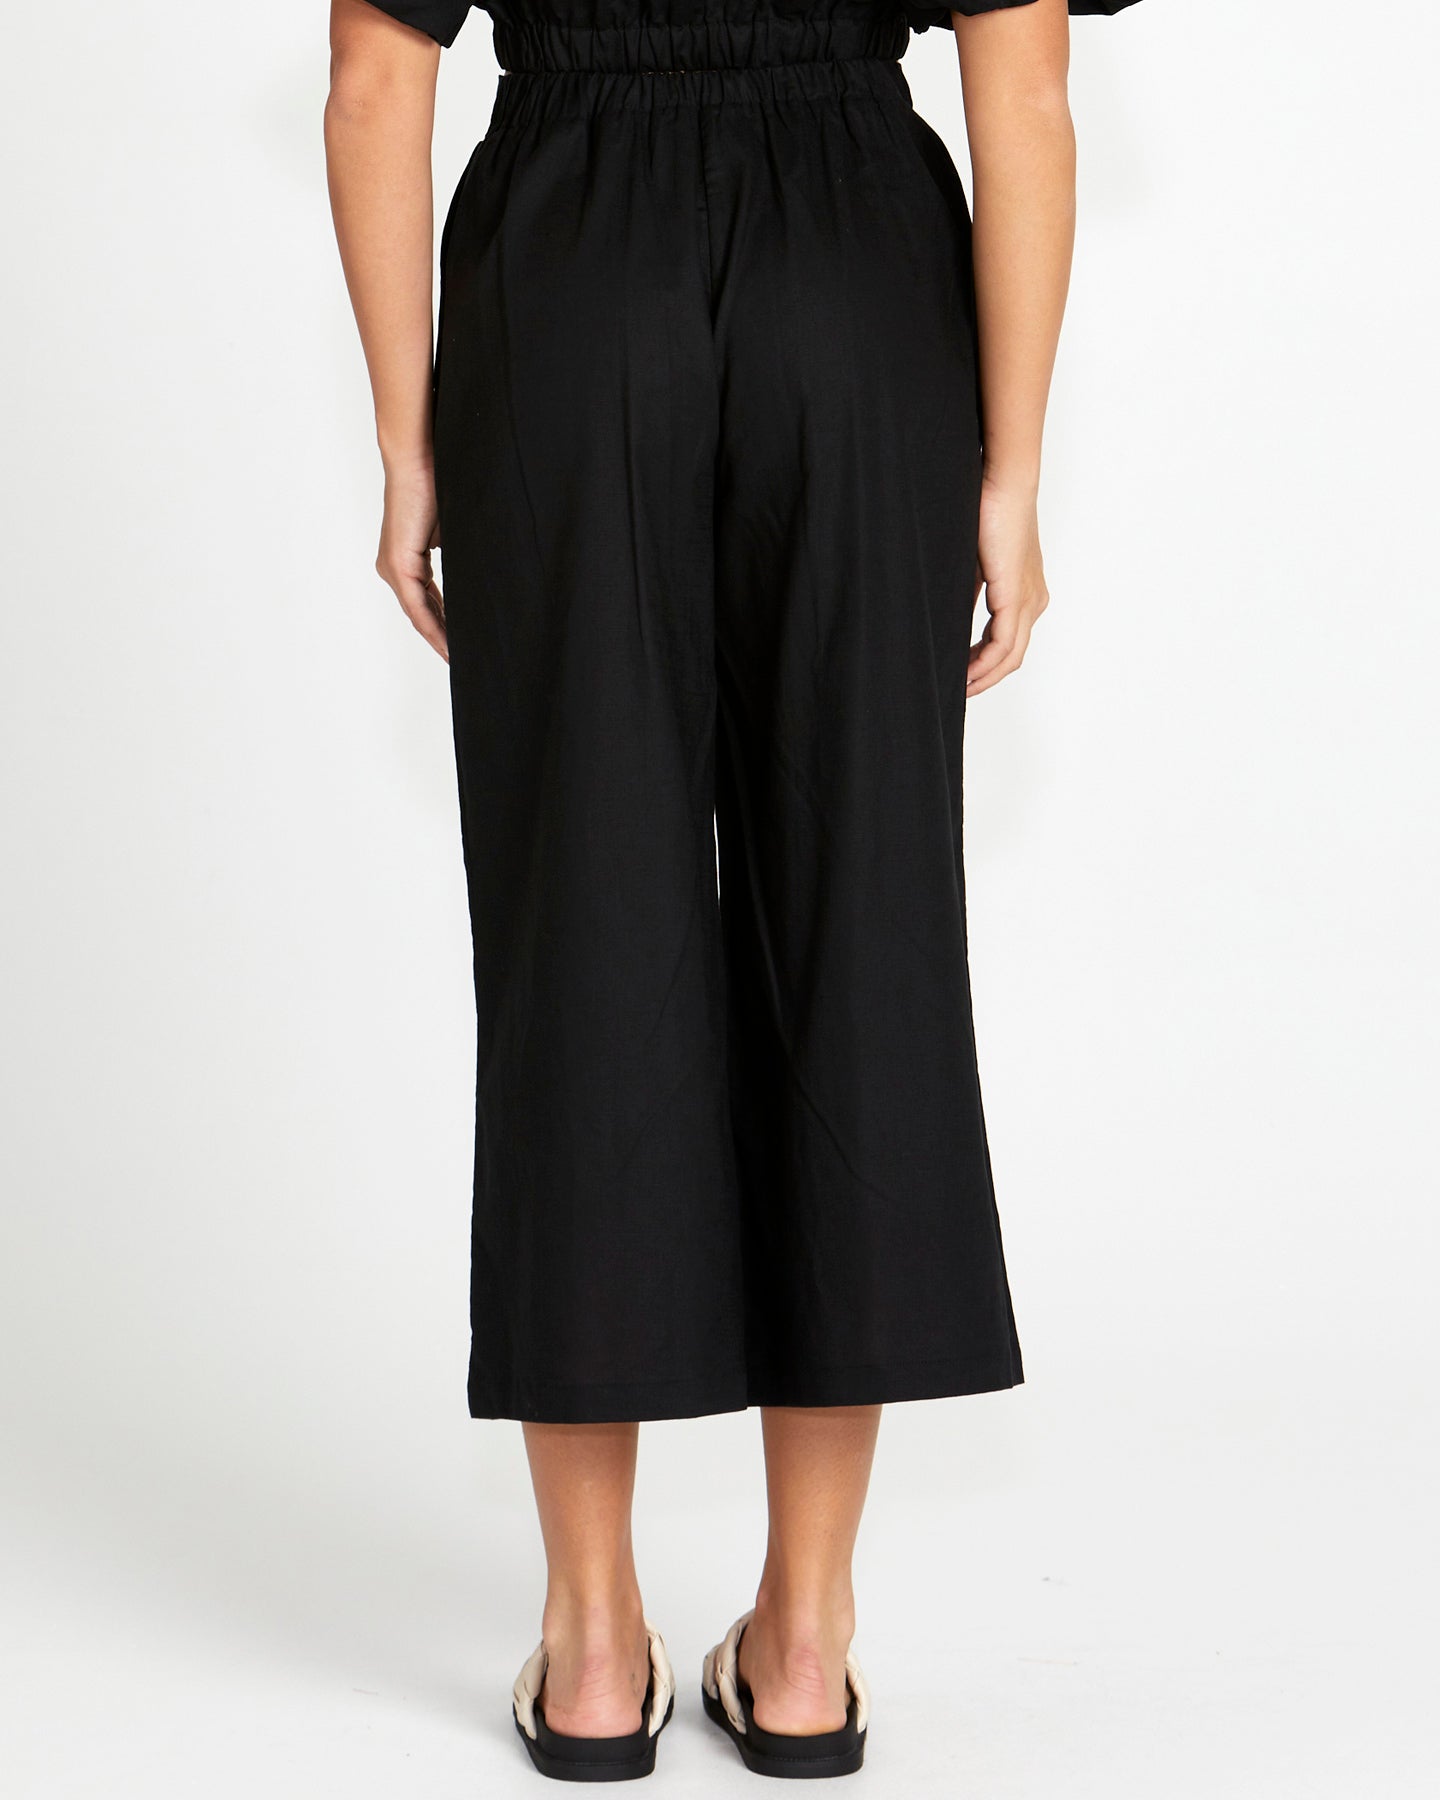 Marnie Relaxed Pant - Black